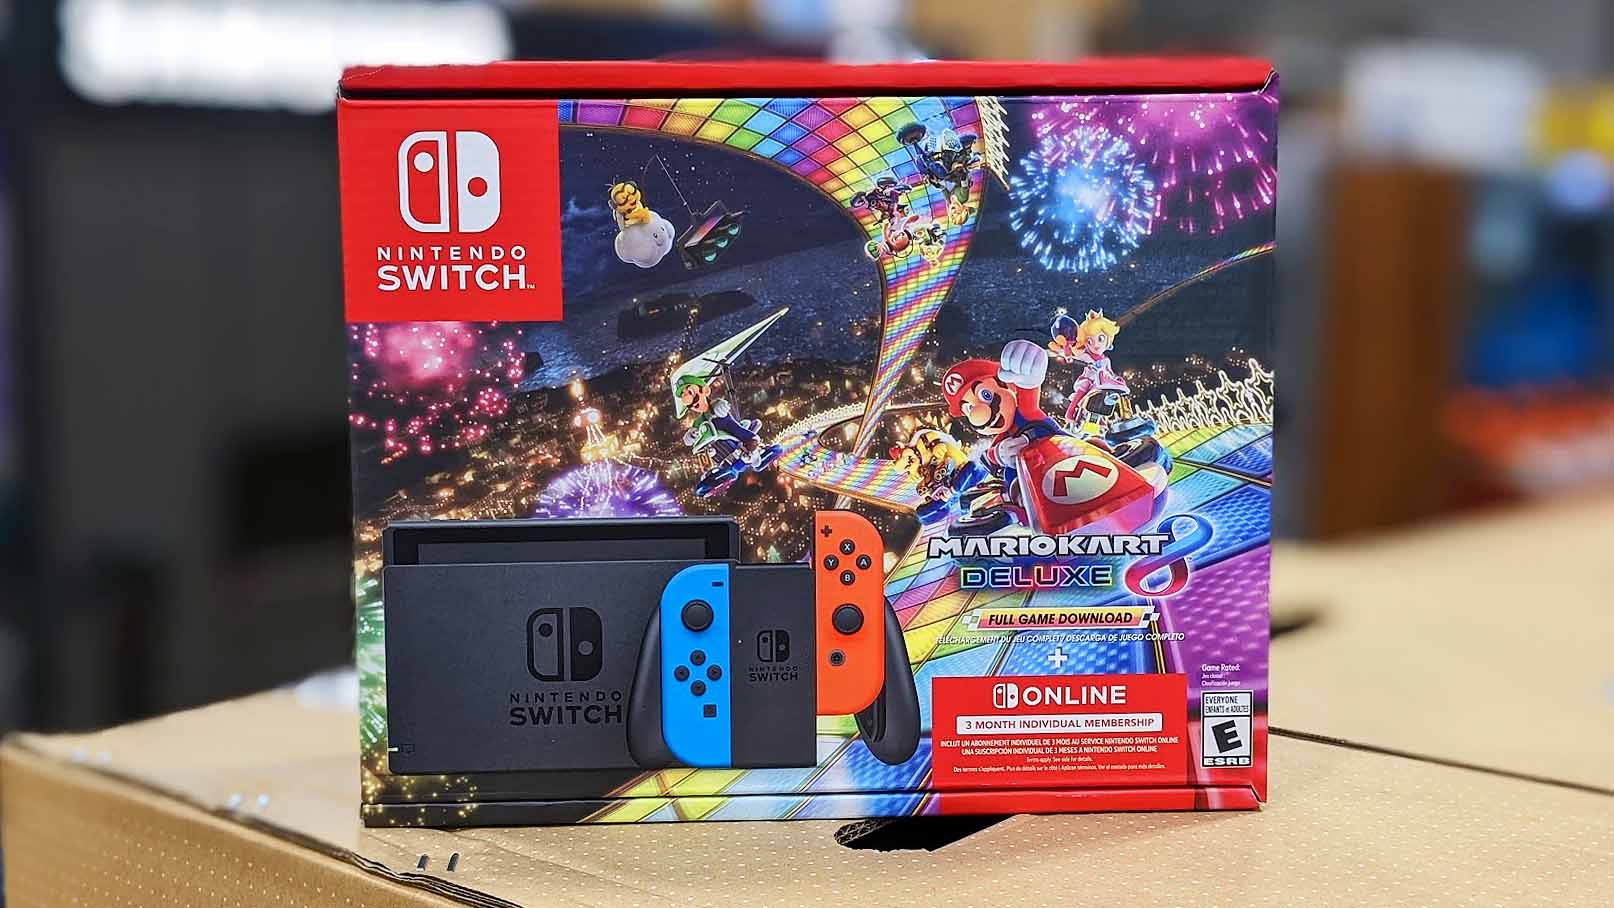 Get $80 of free stuff with this Nintendo Switch Black Friday deal | iMore